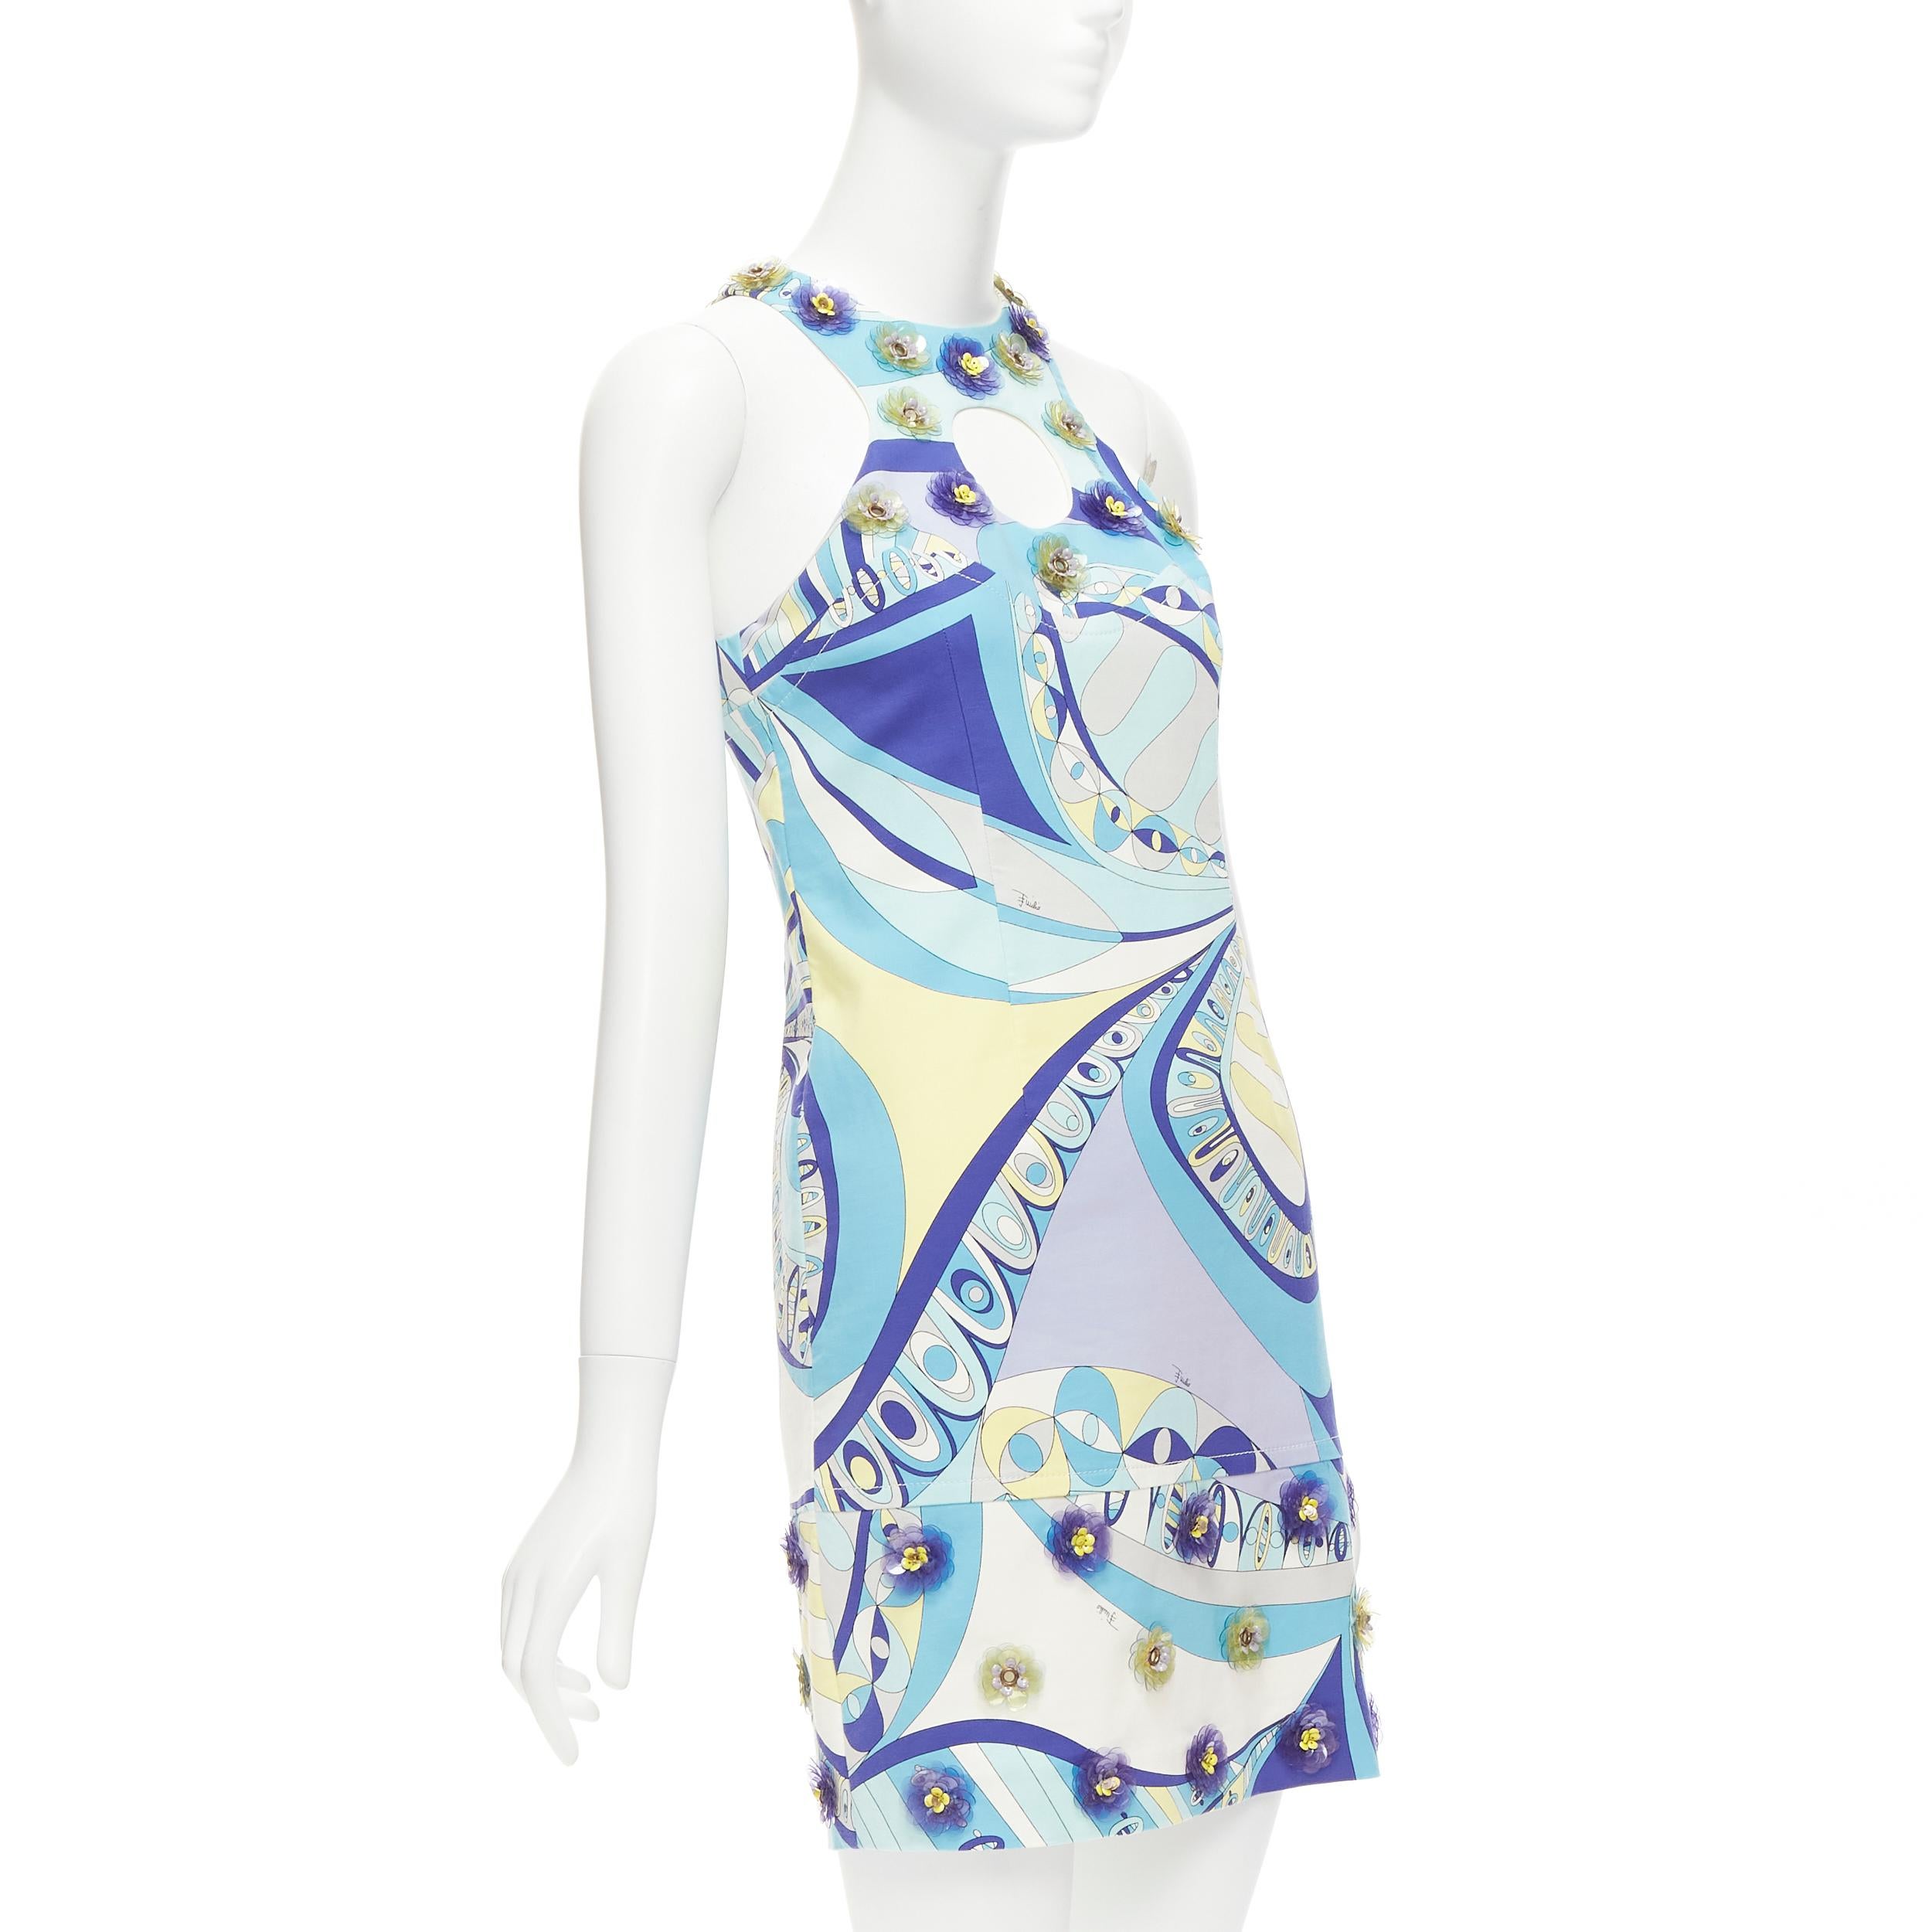 EMILIO PUCCI geometric floral print cut out flower applique halter mini dress In Excellent Condition For Sale In Hong Kong, NT